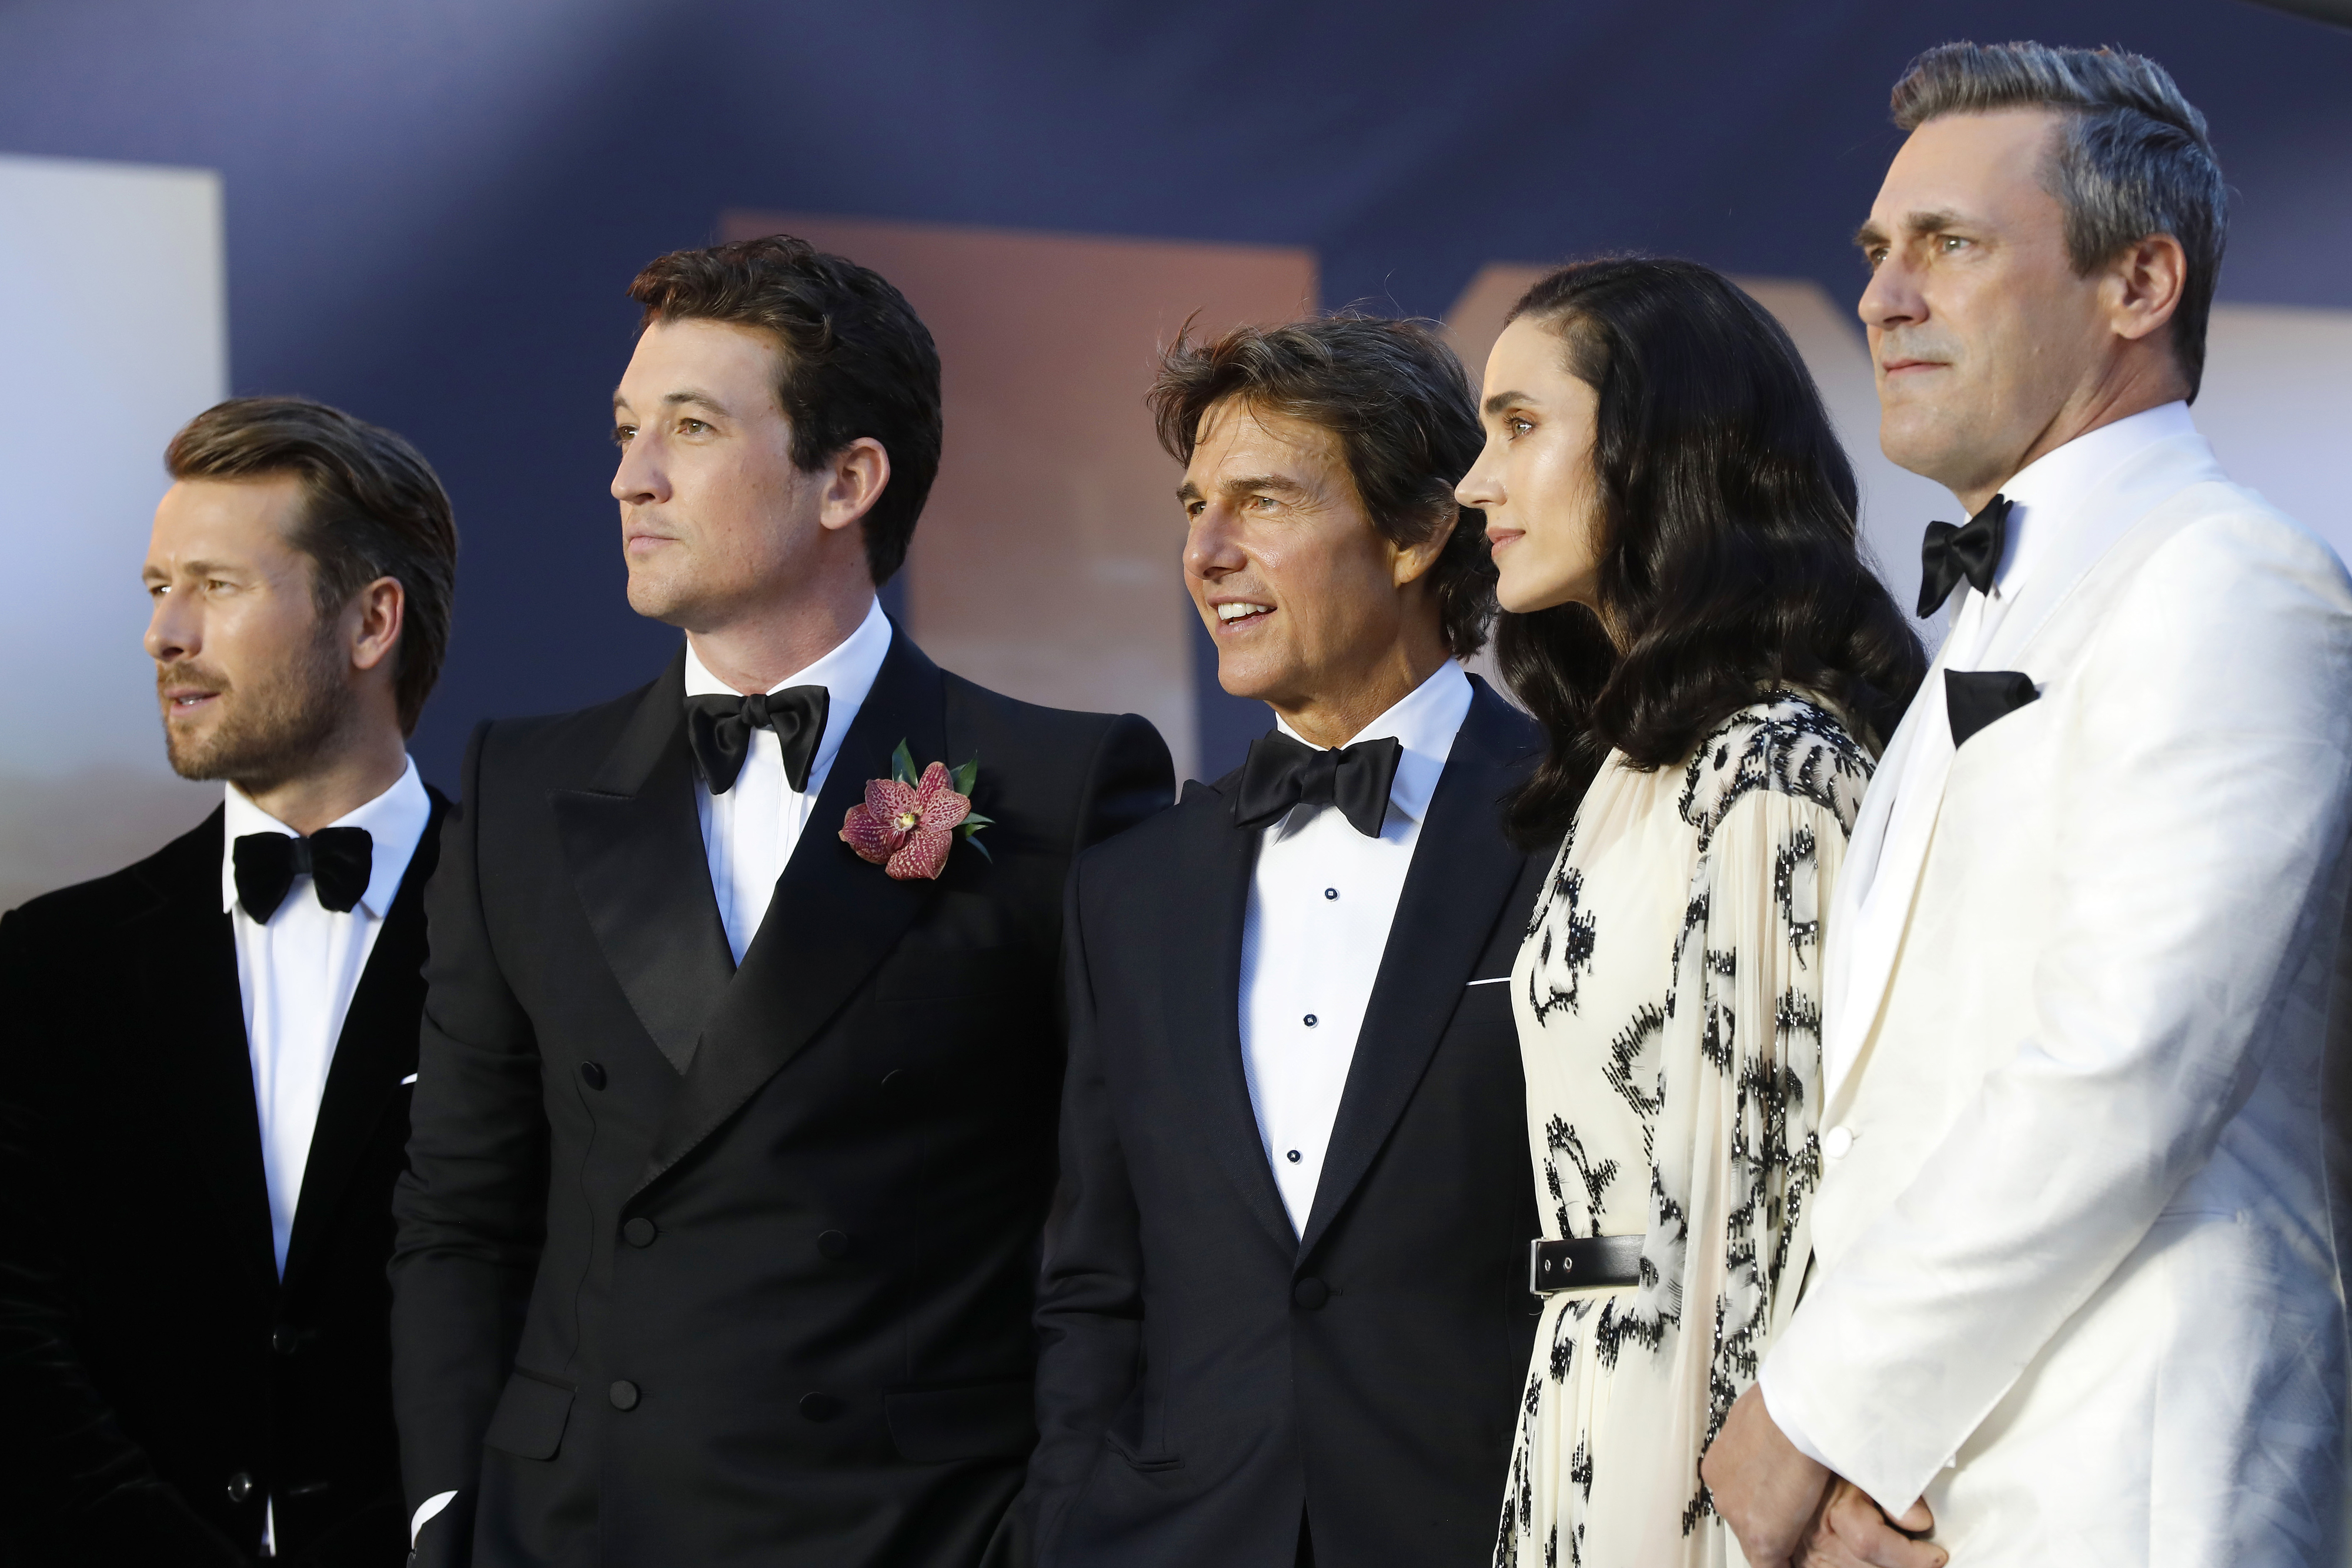 Glen Powell, Miles Teller, Tom Cruise, Jennifer Connelly, and Jon Hamm stand together in formal attire at a red carpet event